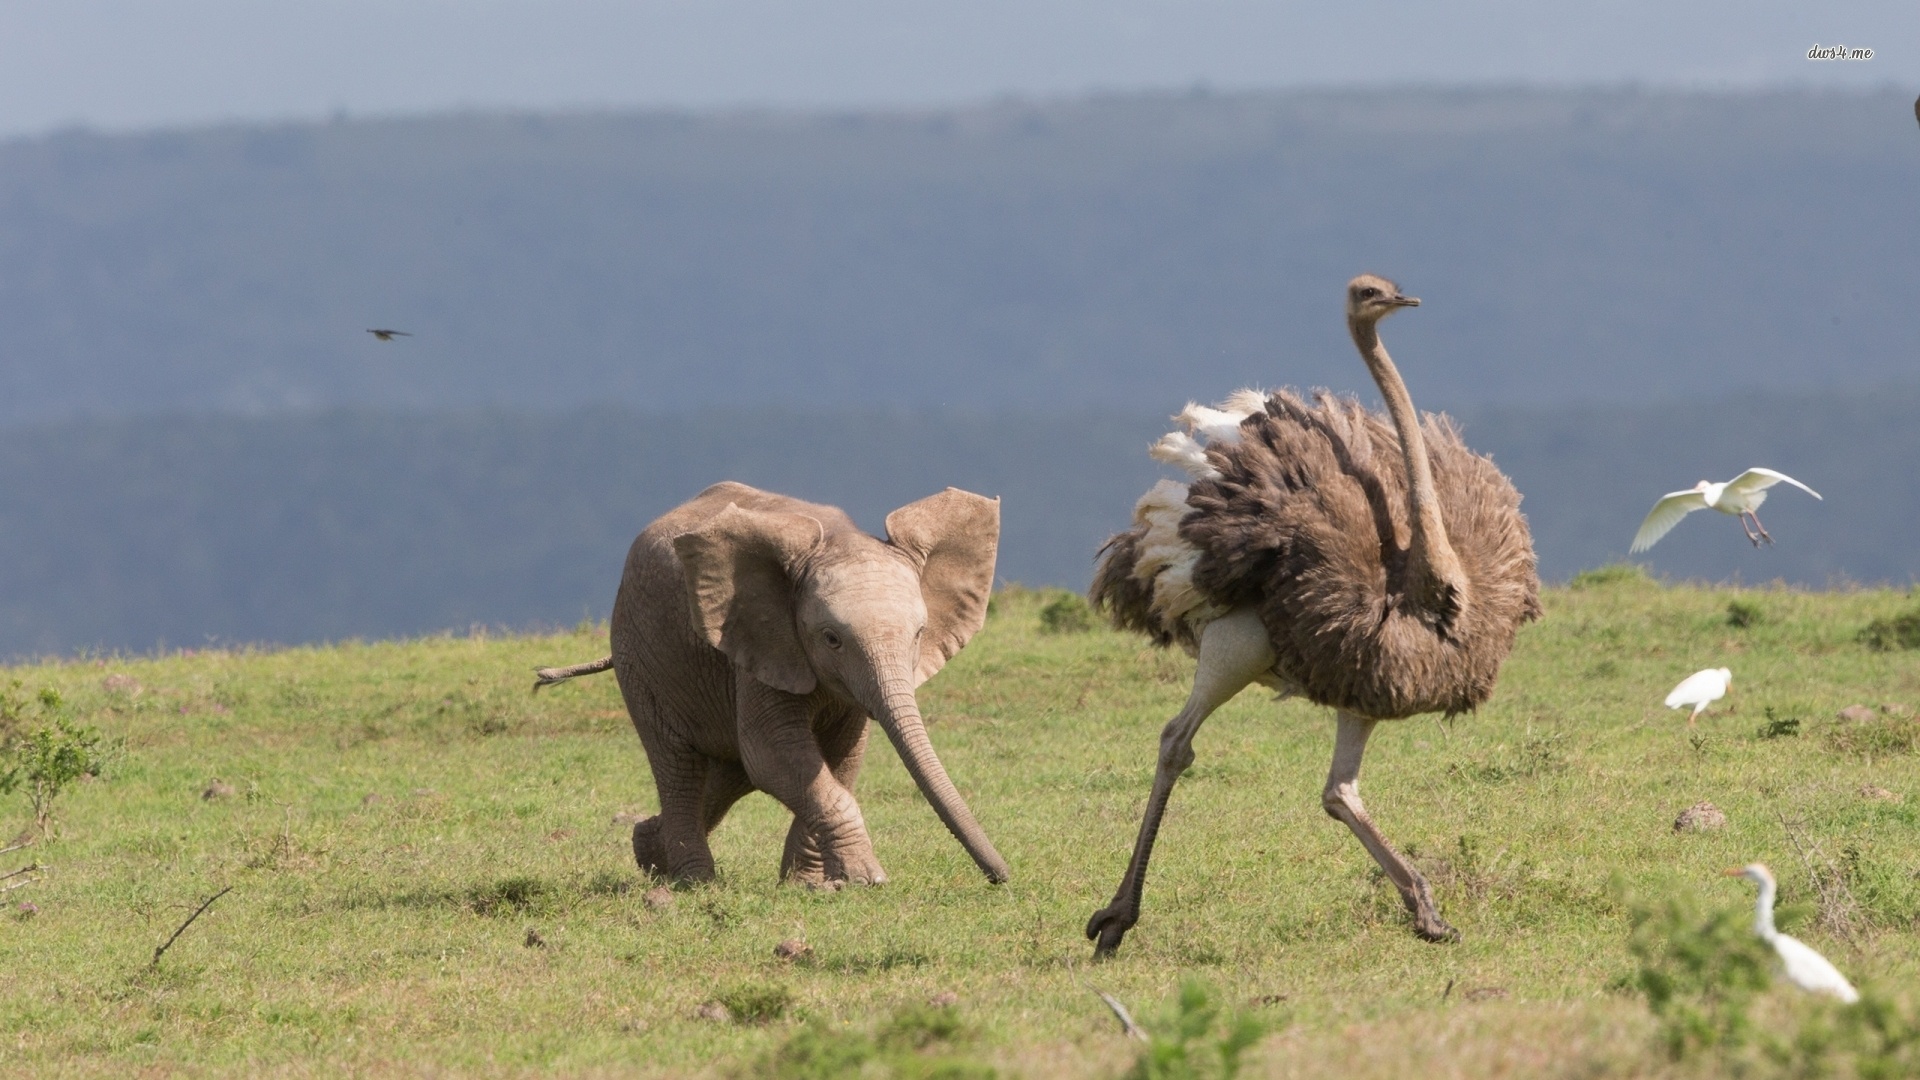 HD wallpaper, Animal Hq Ostriches, Posted By Christopher Sellers, Desktop Full Hd Ostrich Wallpaper Photo, Ostrich Wallpapers, 1920X1080 Full Hd Desktop, Feathered Giants